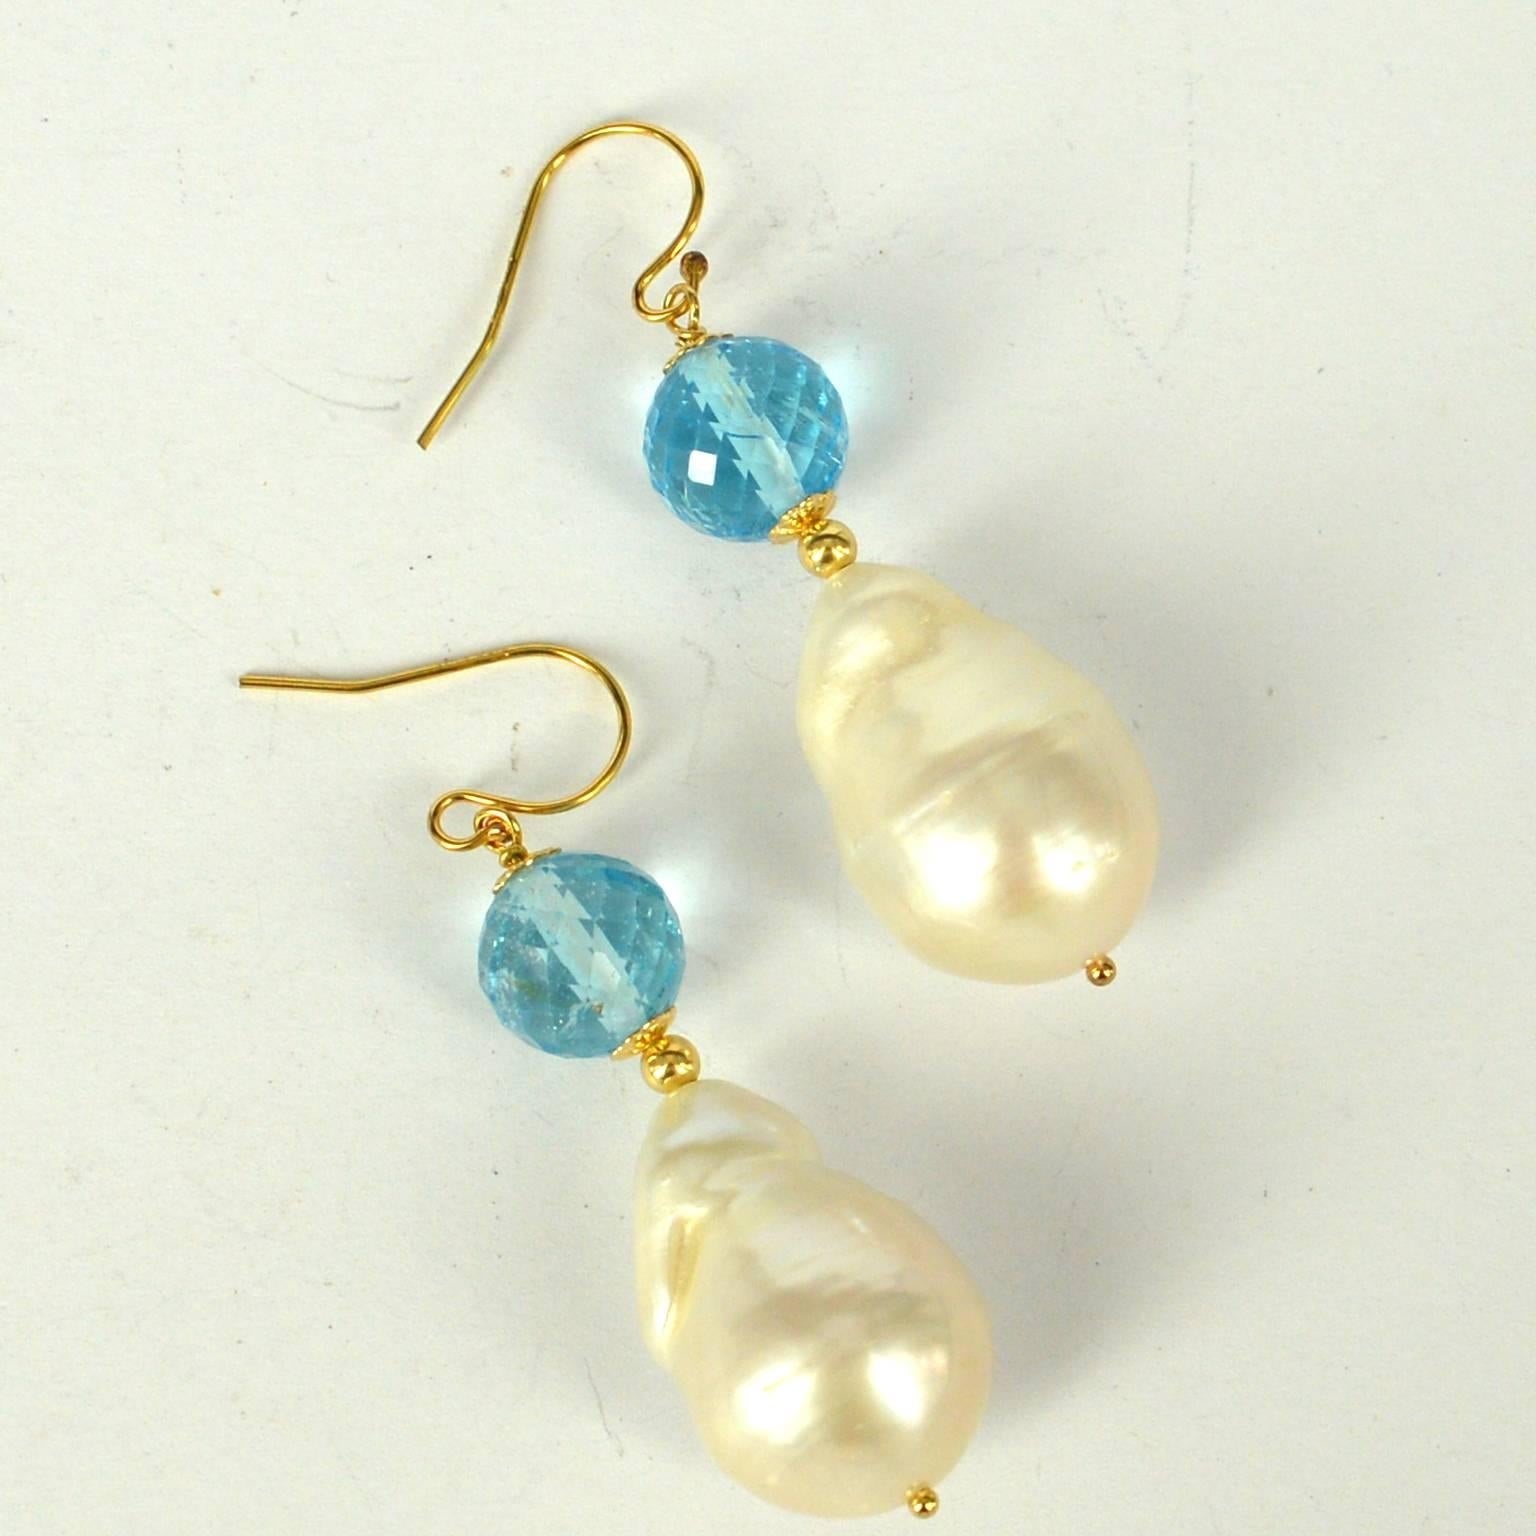 Stunning multi faceted 10mm high quality Blue Topaz with teardrop Baroque Fresh Water Pearls 22x15mm.
Metal 14k Gold Filled
total earring length 50mm
